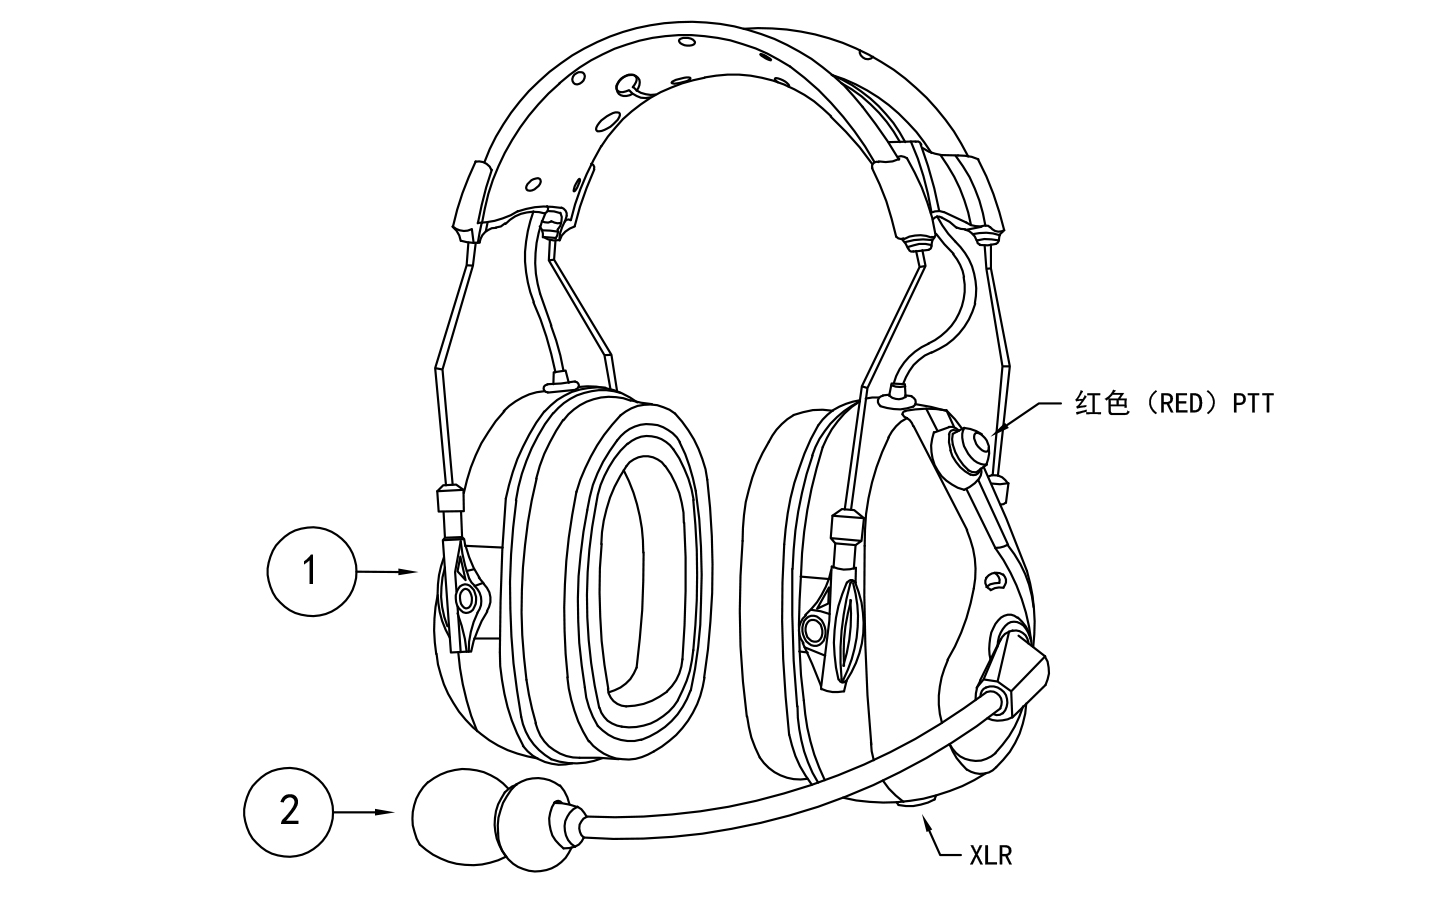 Specification of Magnetic Heavy-Duty Headset RAN-3500Q